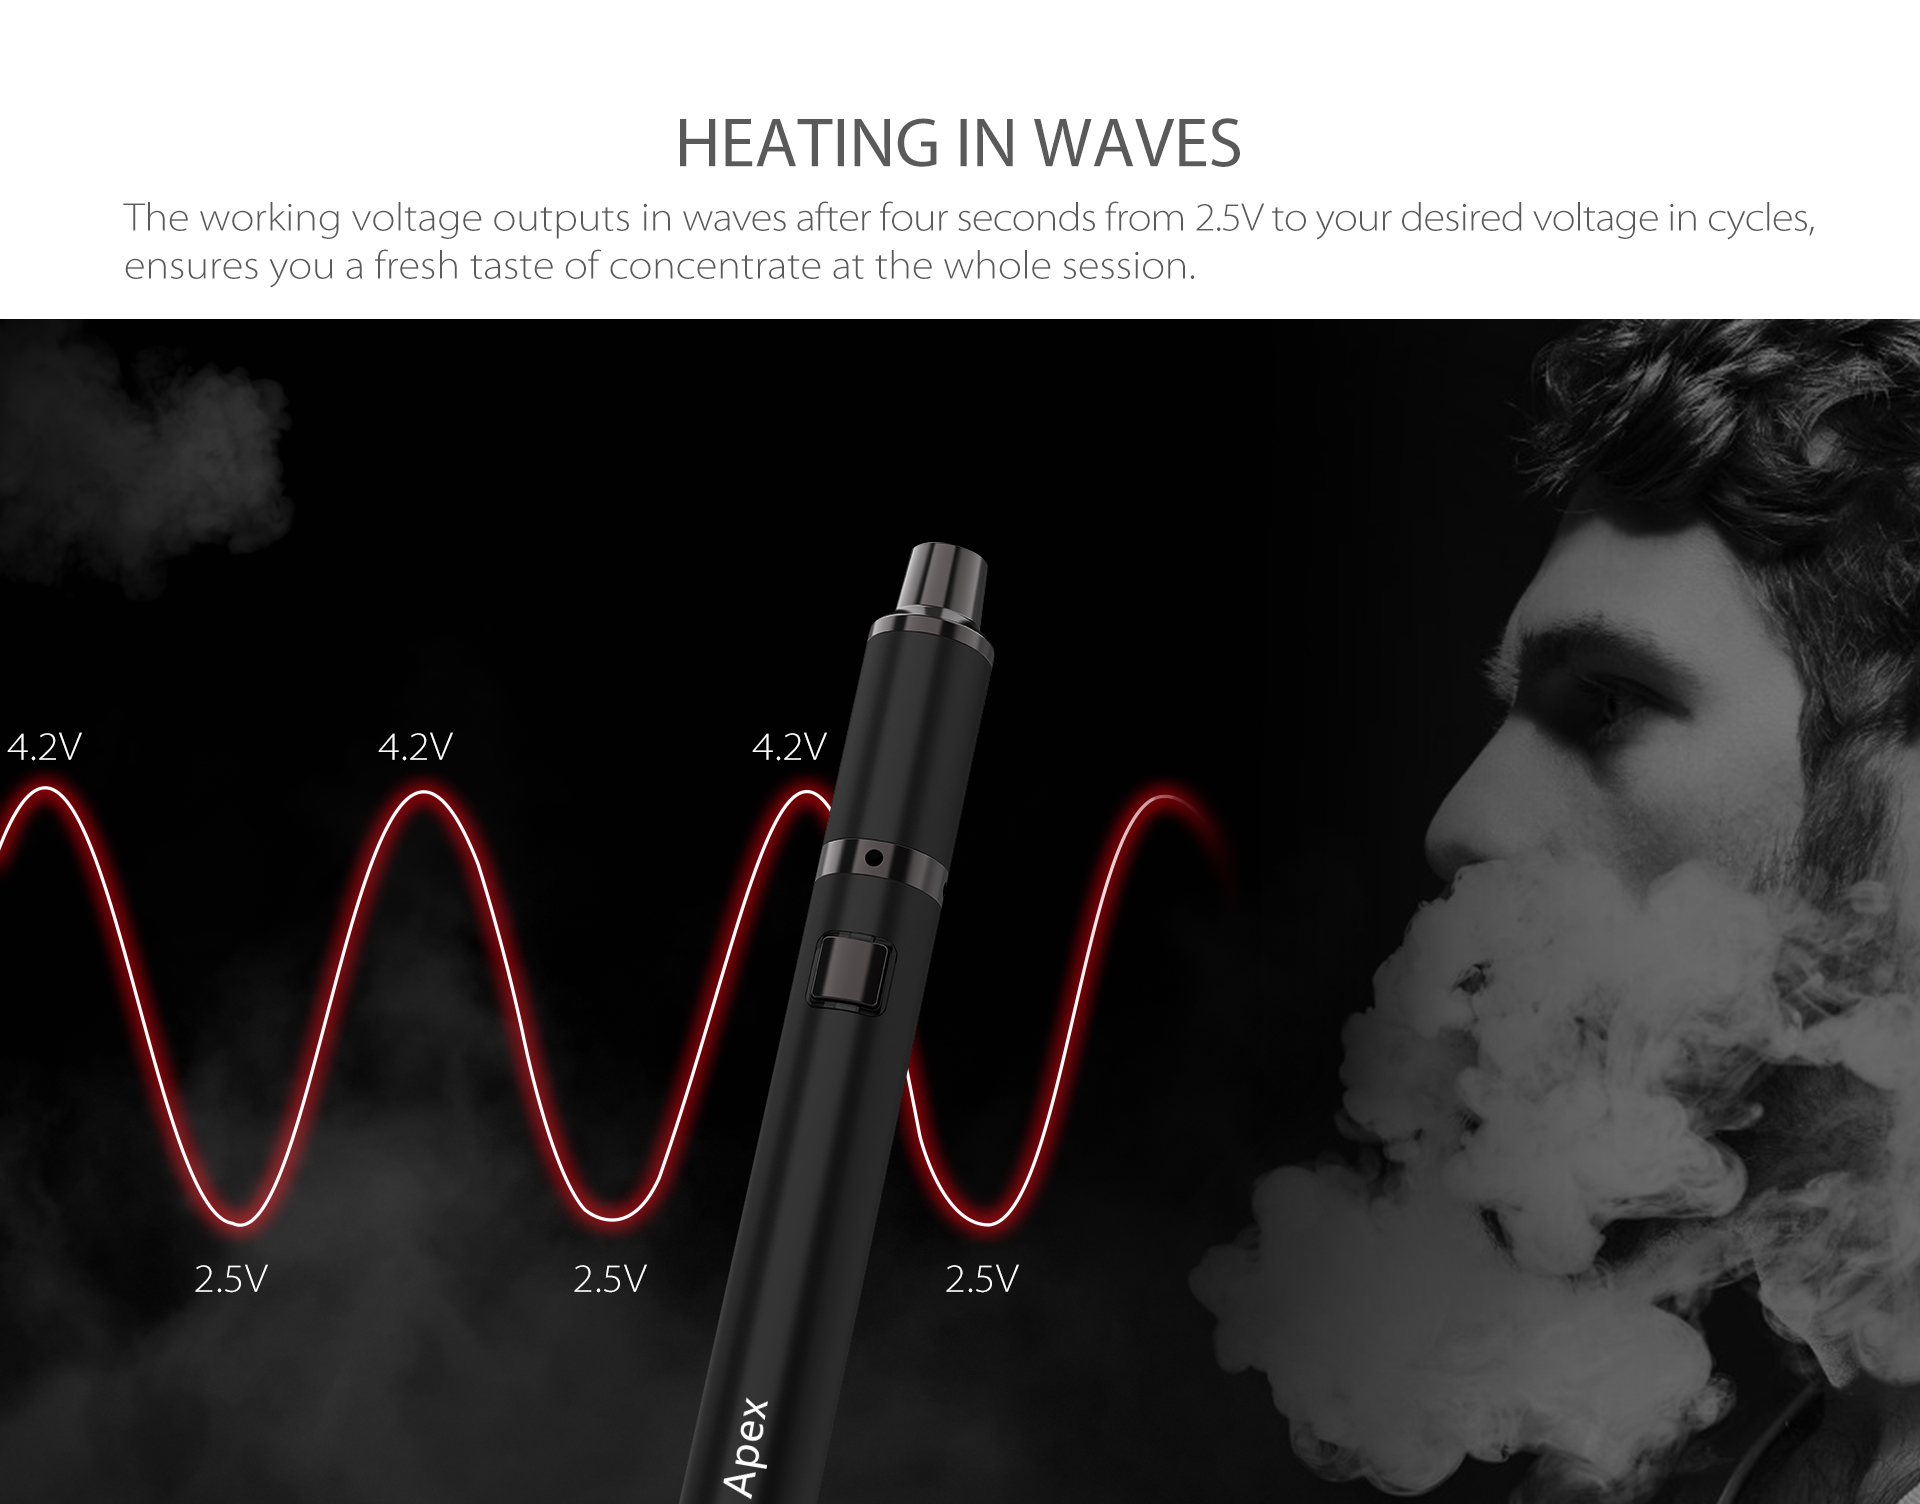 Yocan Apex concentrate vaporizer pen featured heating in waves function to ensure fresh flavor.